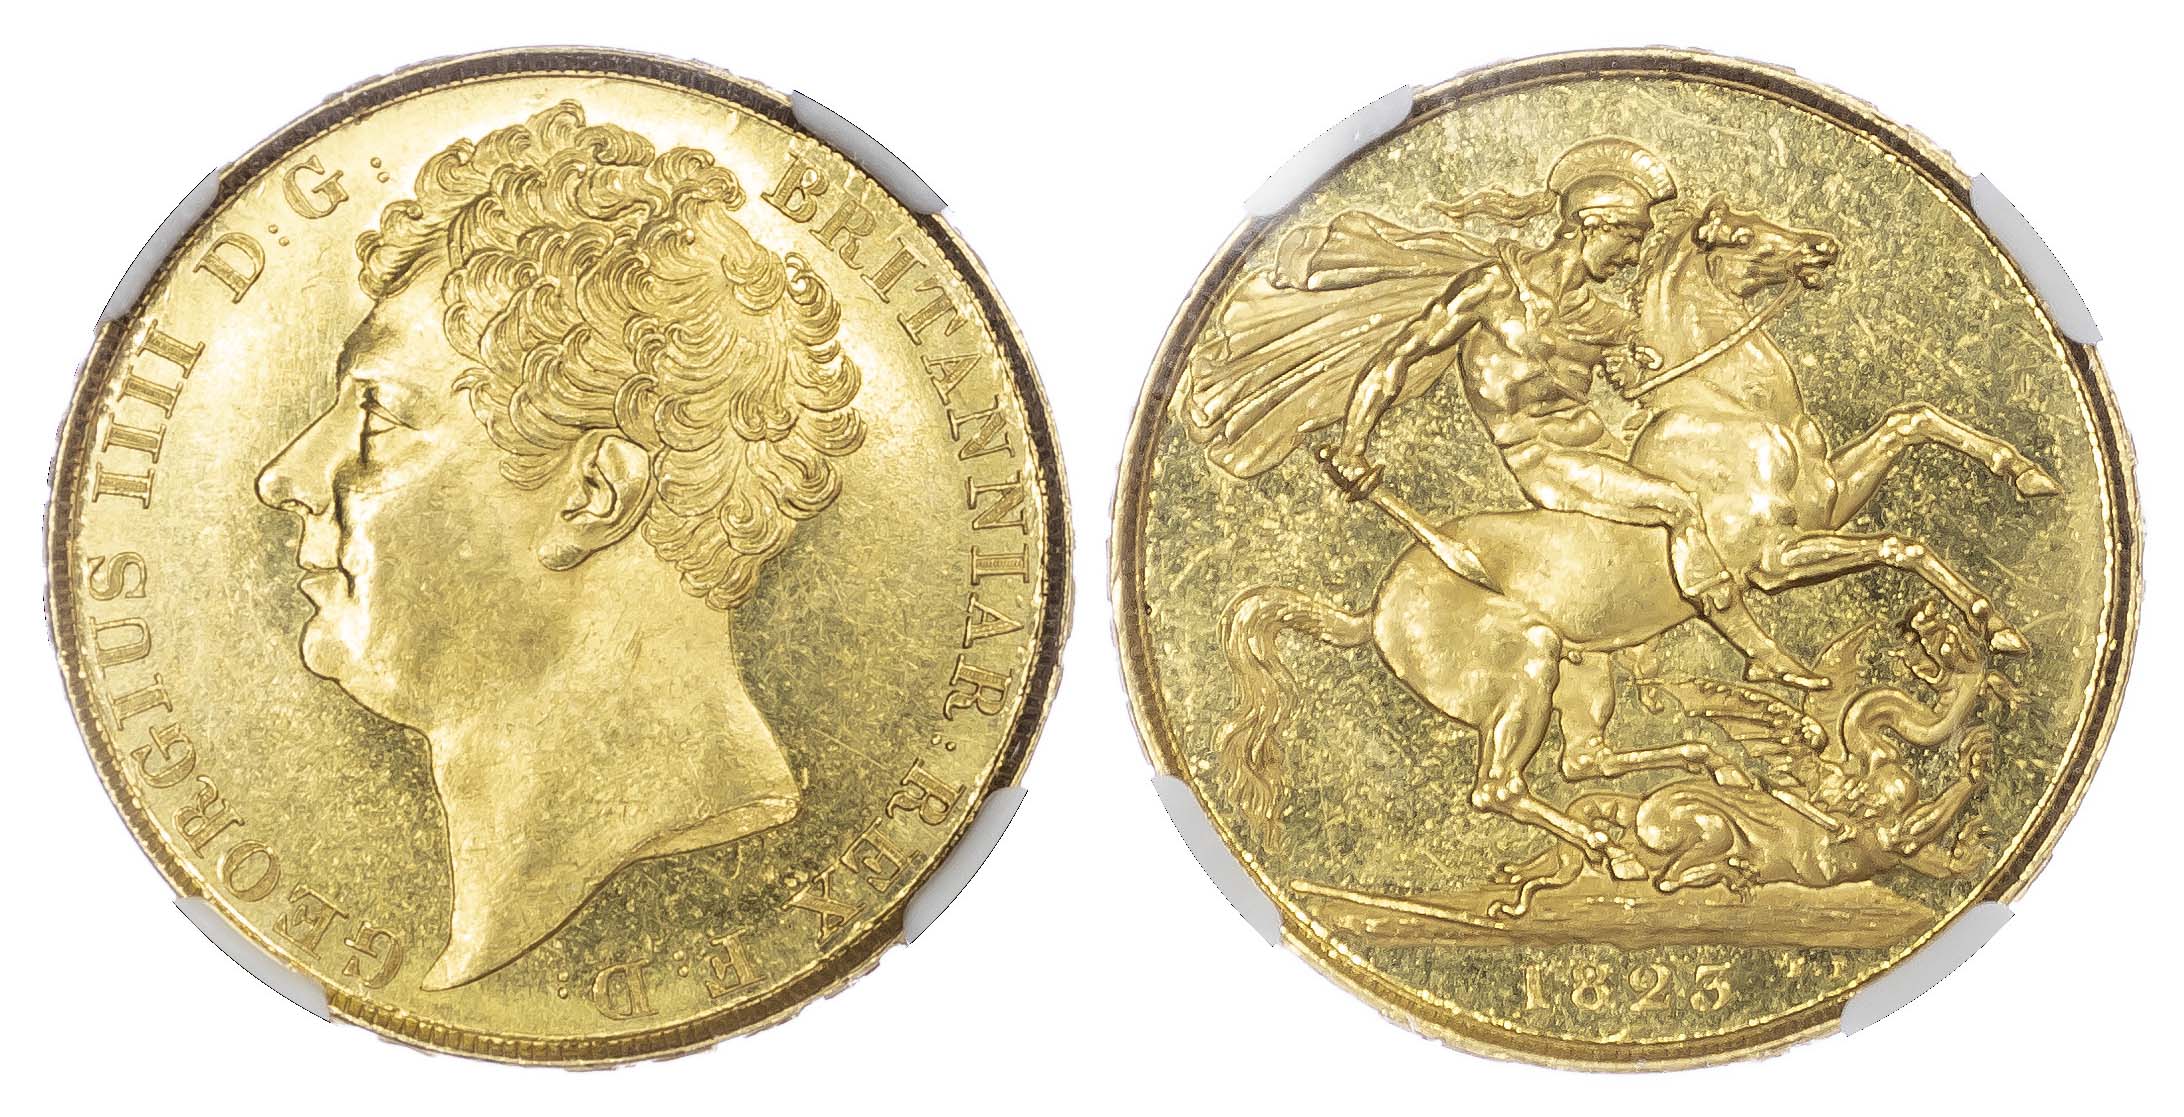 George IV (1820-30), Two Pounds, 1823. NGC MS63